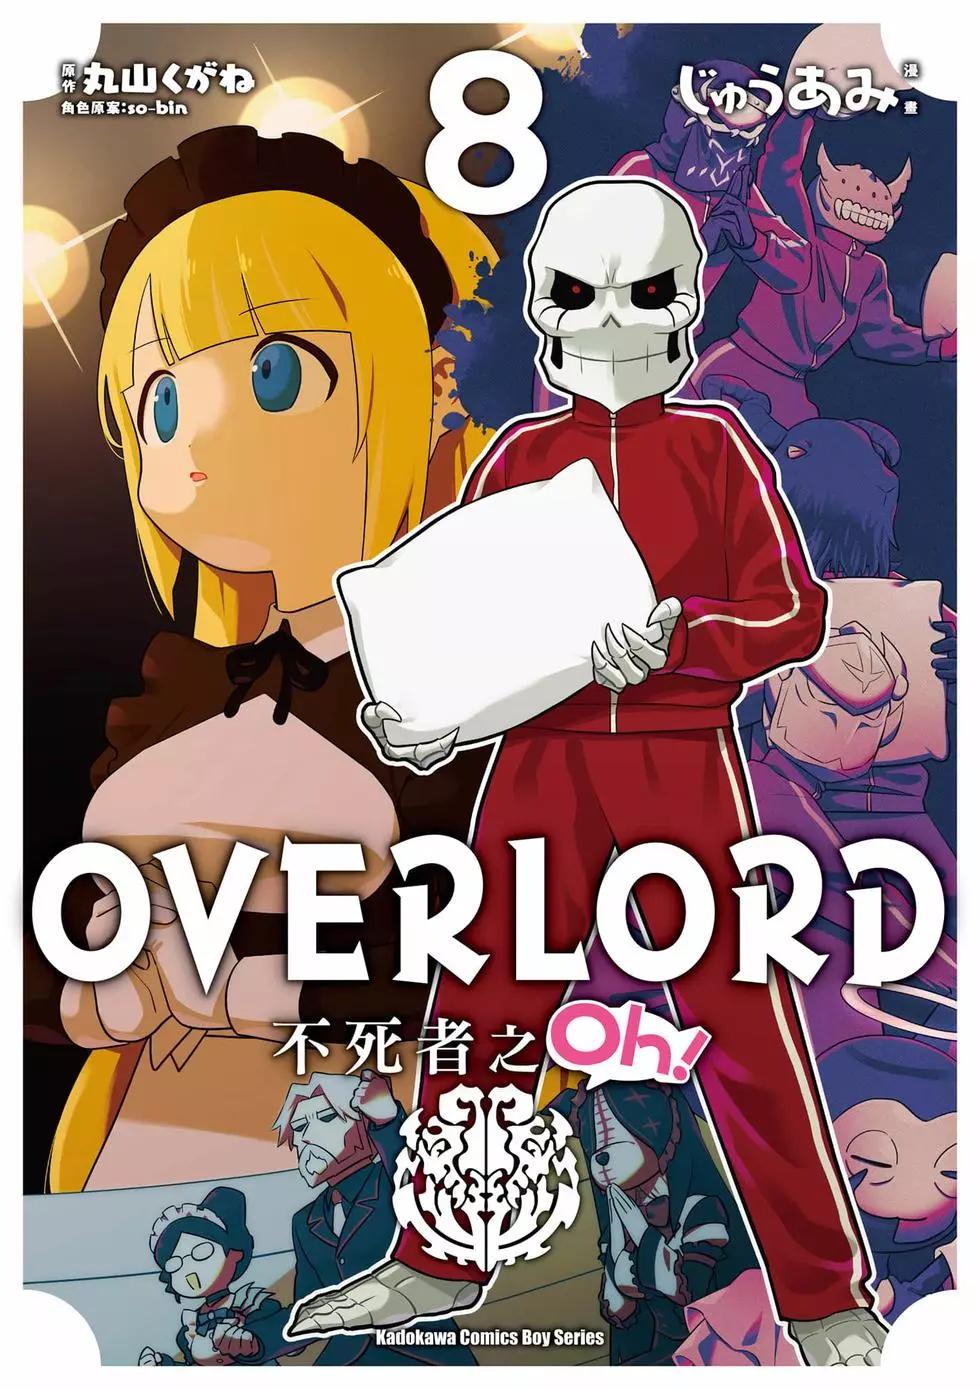 Overlord不死者之OH！ - 第08卷(1/3) - 1